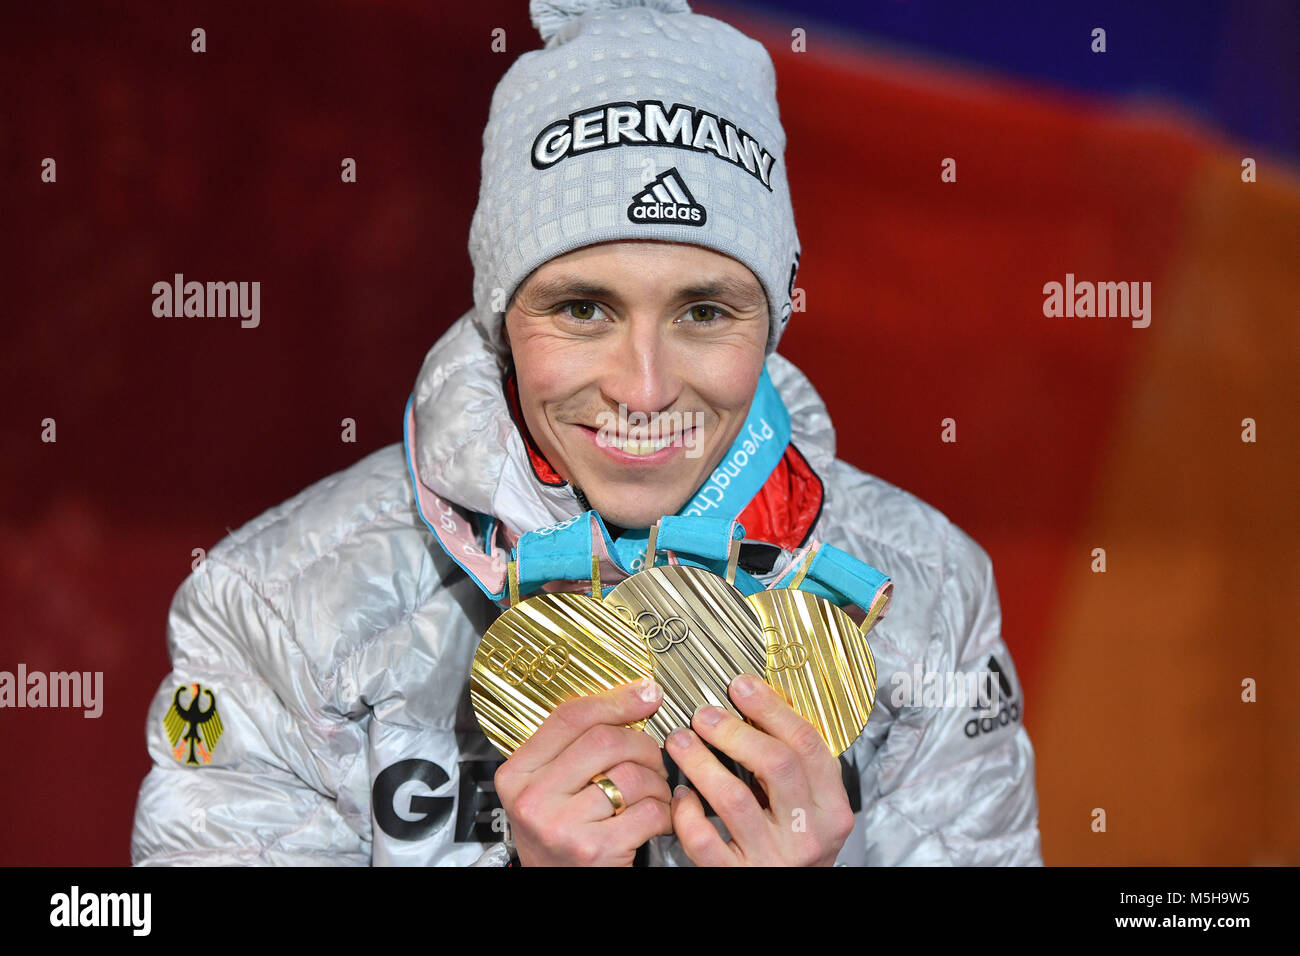 Deutsche Sportler High Resolution Stock Photography and Images - Alamy